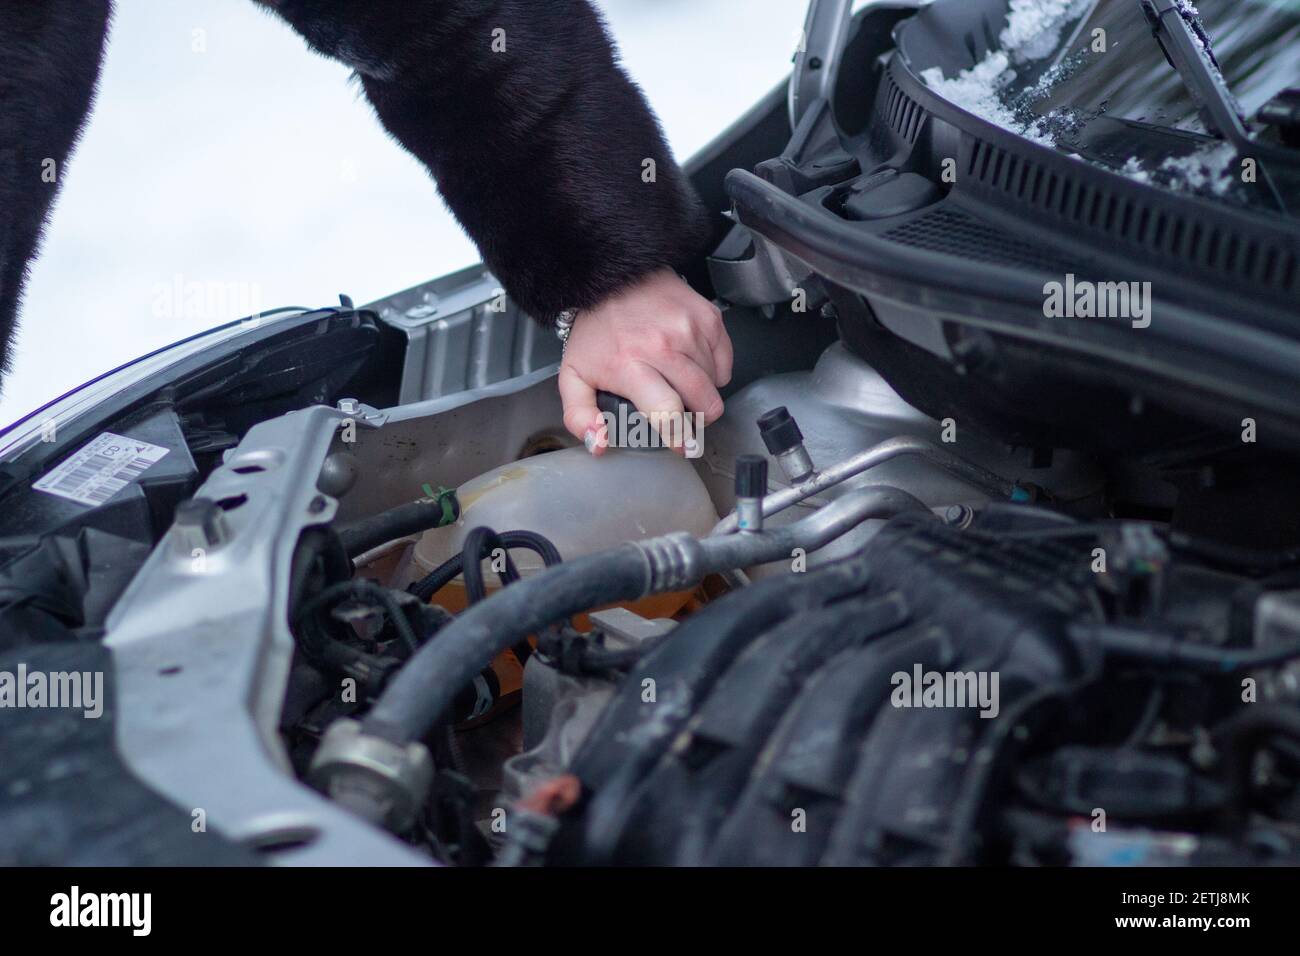 Woman checks the presence of antifreeze in the car. Preparing the car for winter conditions Stock Photo